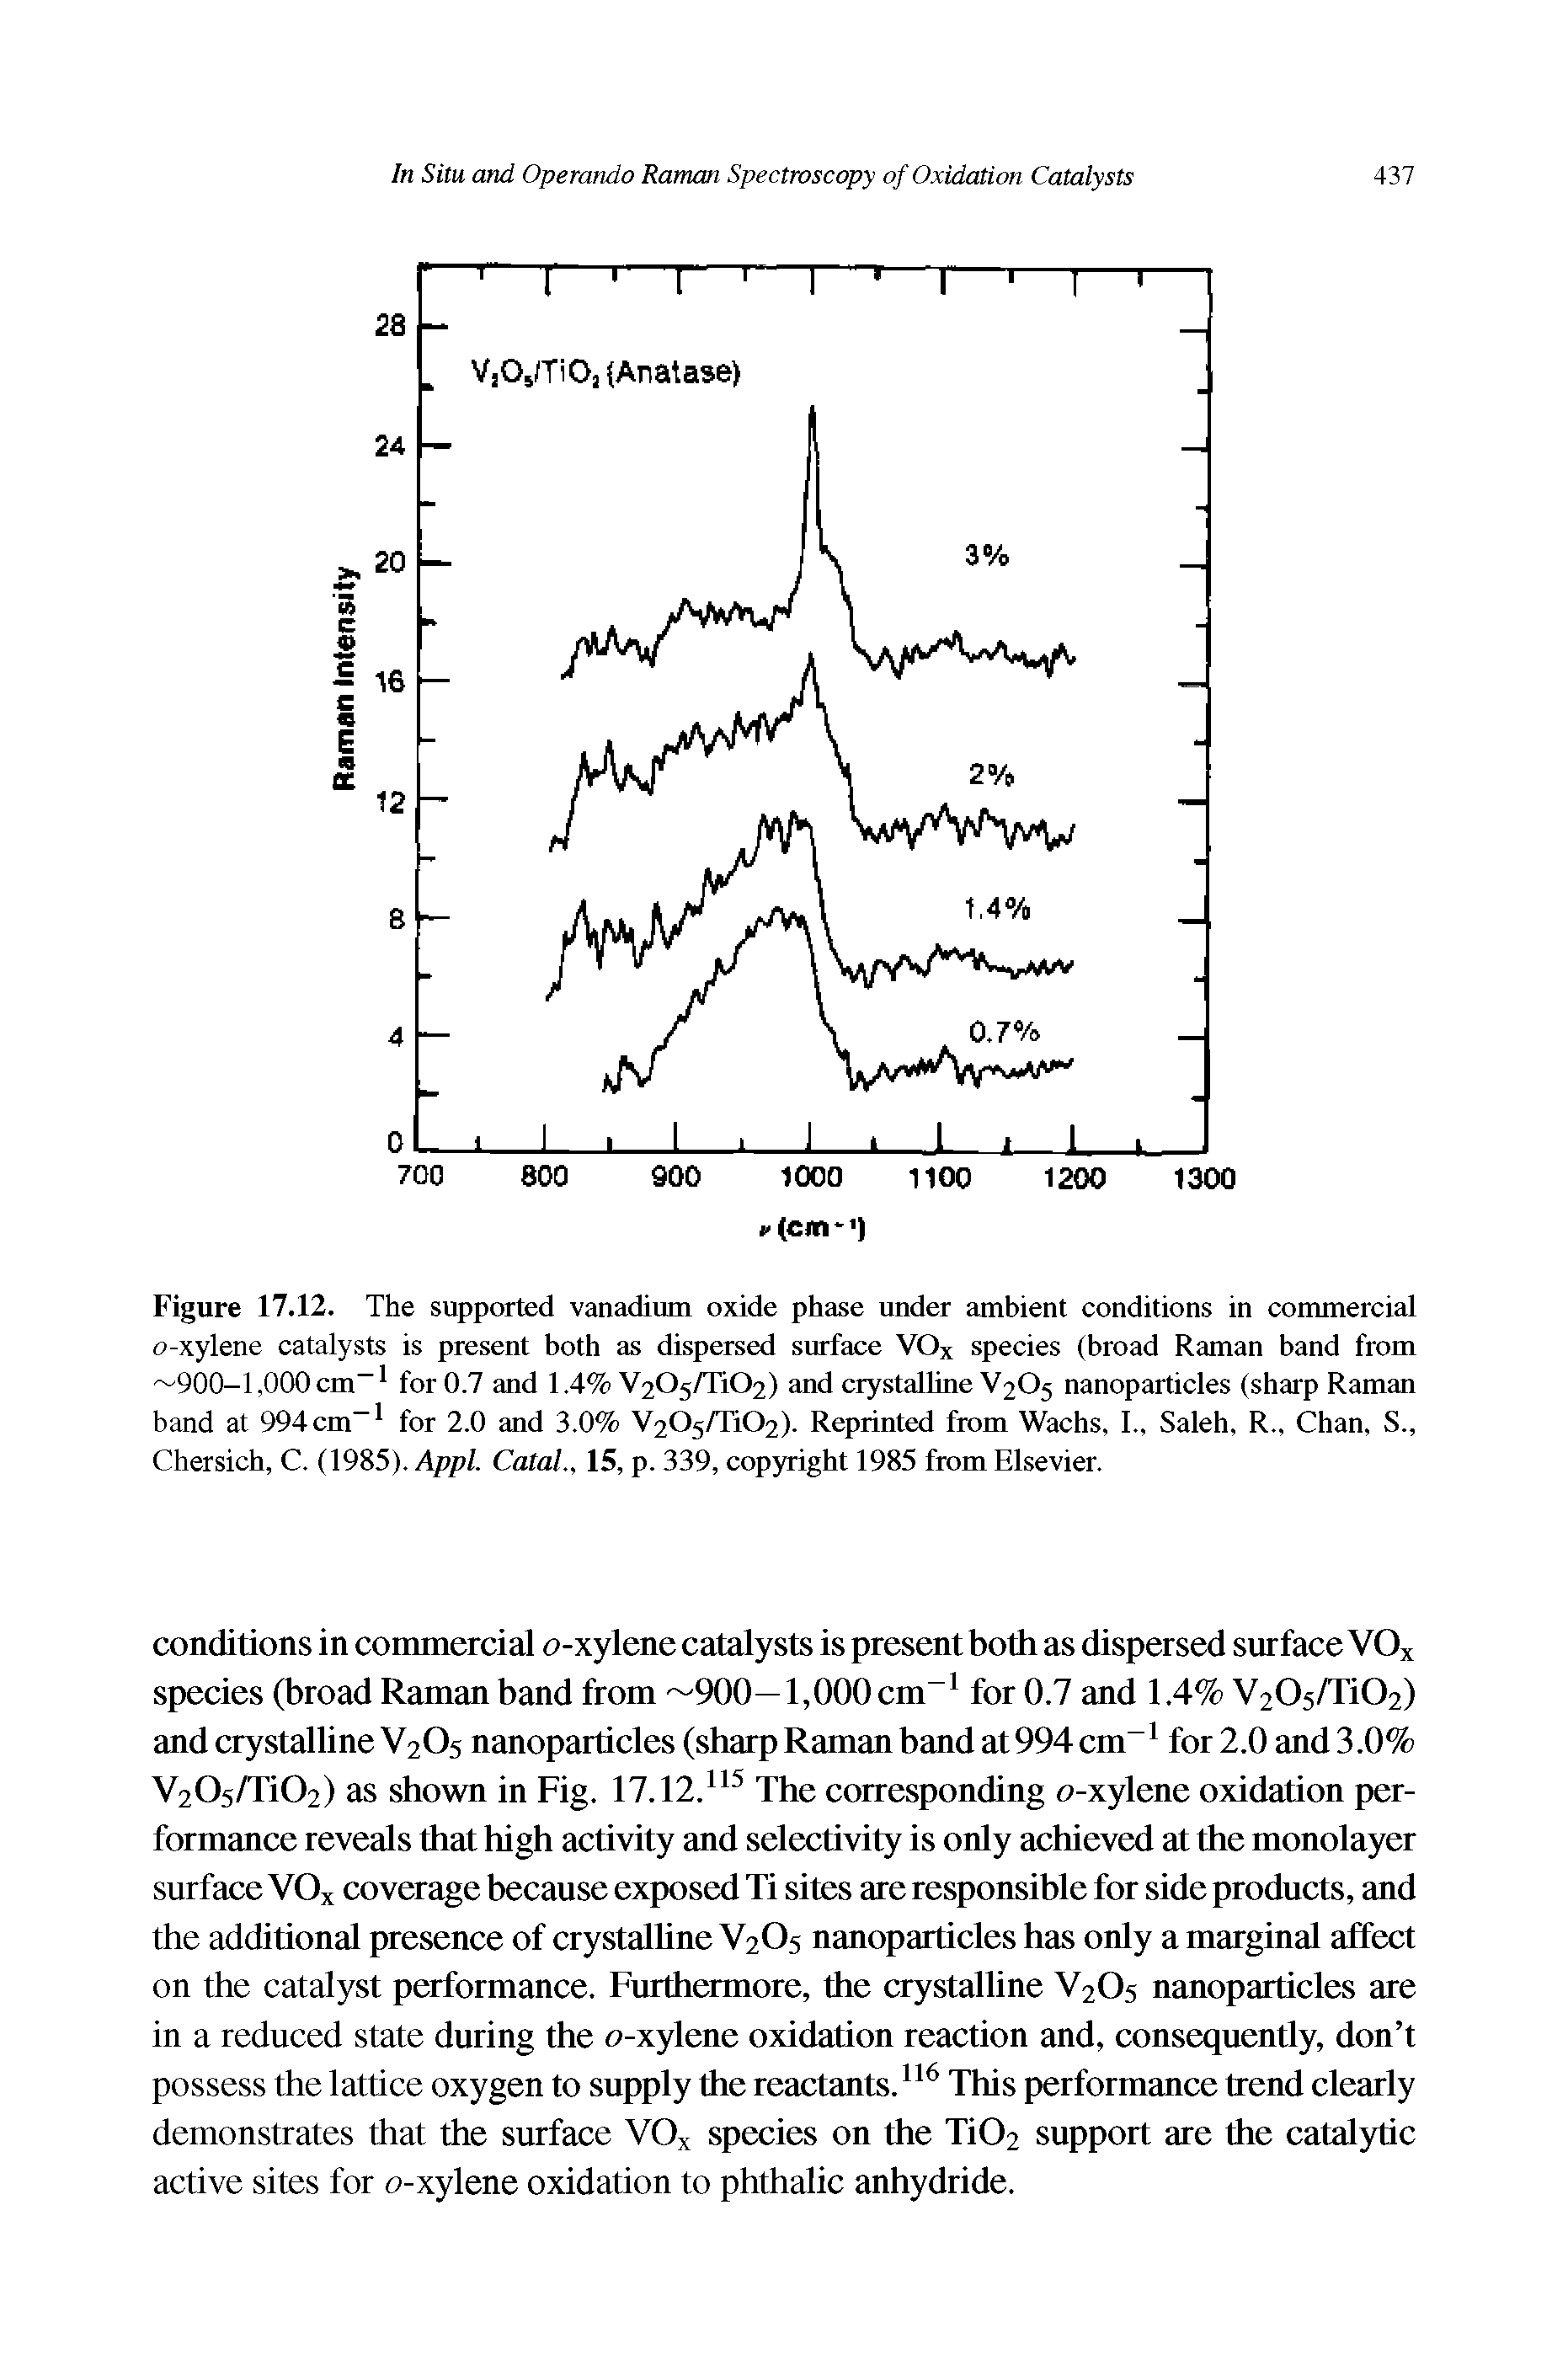 Figure 17.12. The supported vanadium oxide phase under ambient conditions in commercial o-xylene catalysts is present both as dispersed surface VOx species (broad Raman band from 900-l, 000 cm for 0.7 and 1.4% V205/Ti02) and crystaltine V2O5 nanoparticles (sharp Raman band at 994 cm for 2.0 and 3.0% V205/Ti02). Reprinted from Wachs, I., Saleh, R., Chan, S., Chersich, C. (1985). Appl. Catal., 15, p. 339, copyright 1985 from Elsevier.